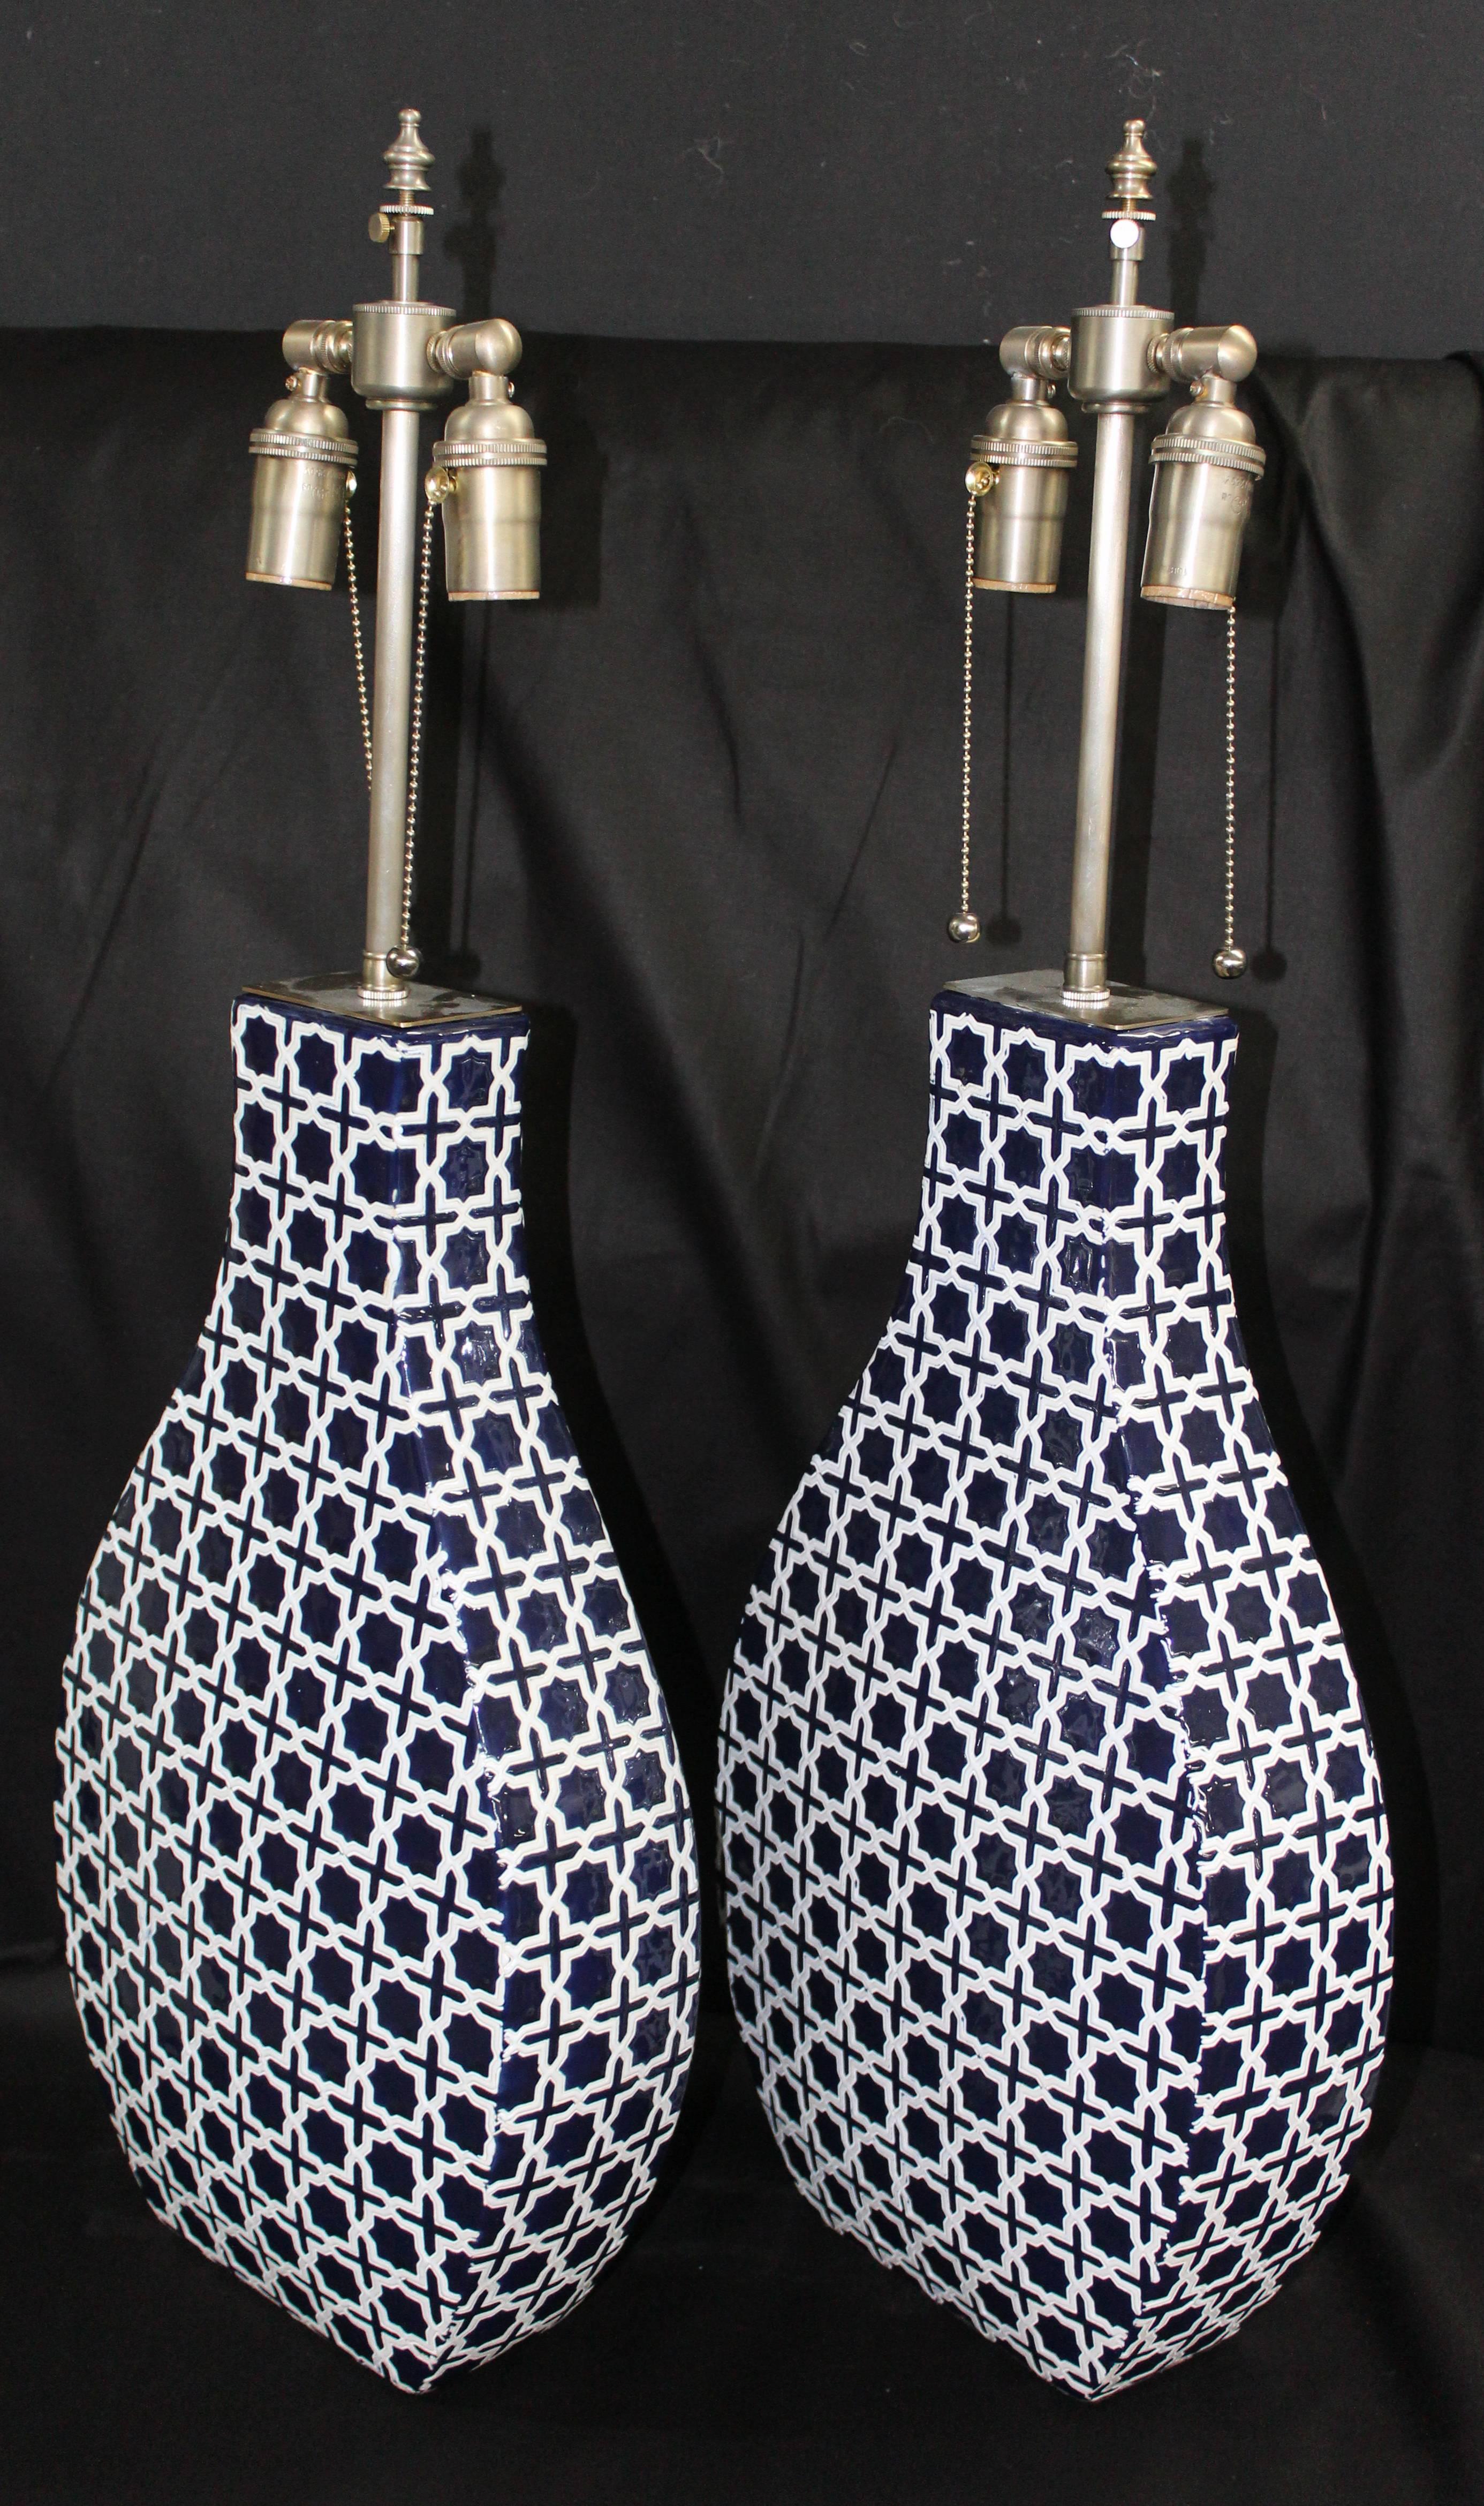 Large pair of ceramic vessels in cobalt and white with lamp application. The vessels are newly wired with dual control chains. The vessel height is 20 1/2